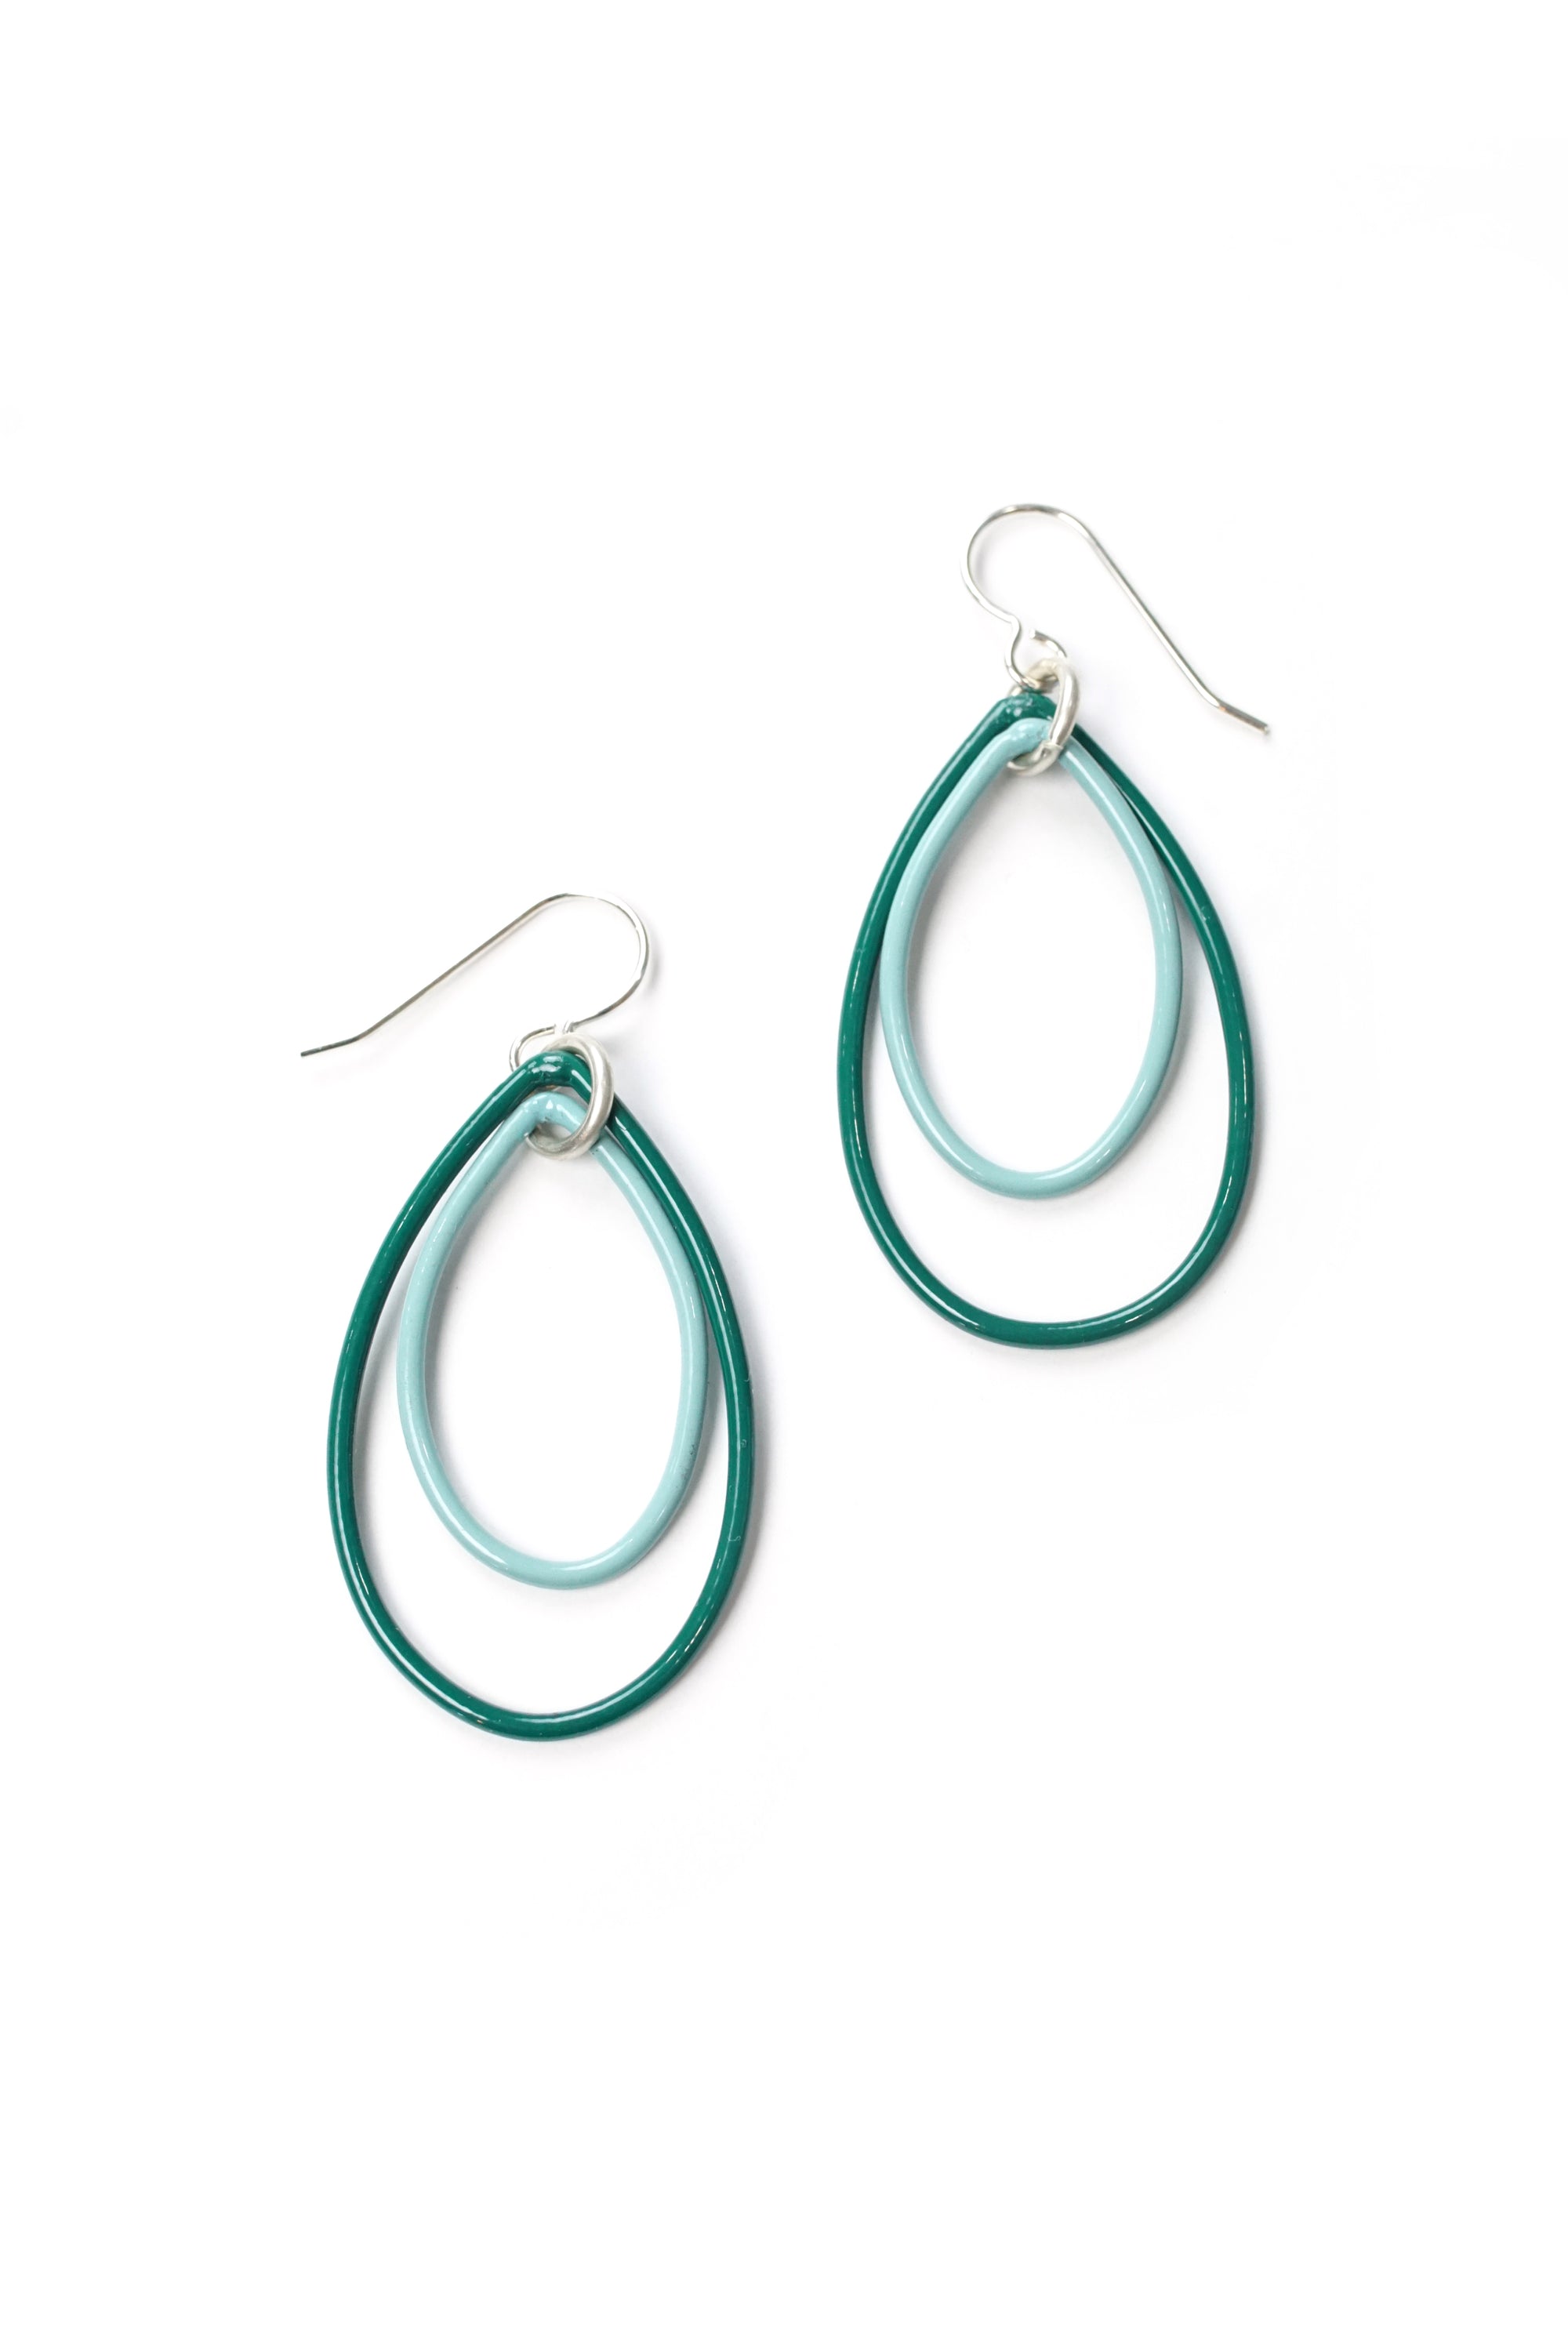 Nellie earrings in Emerald Green and Faded Teal